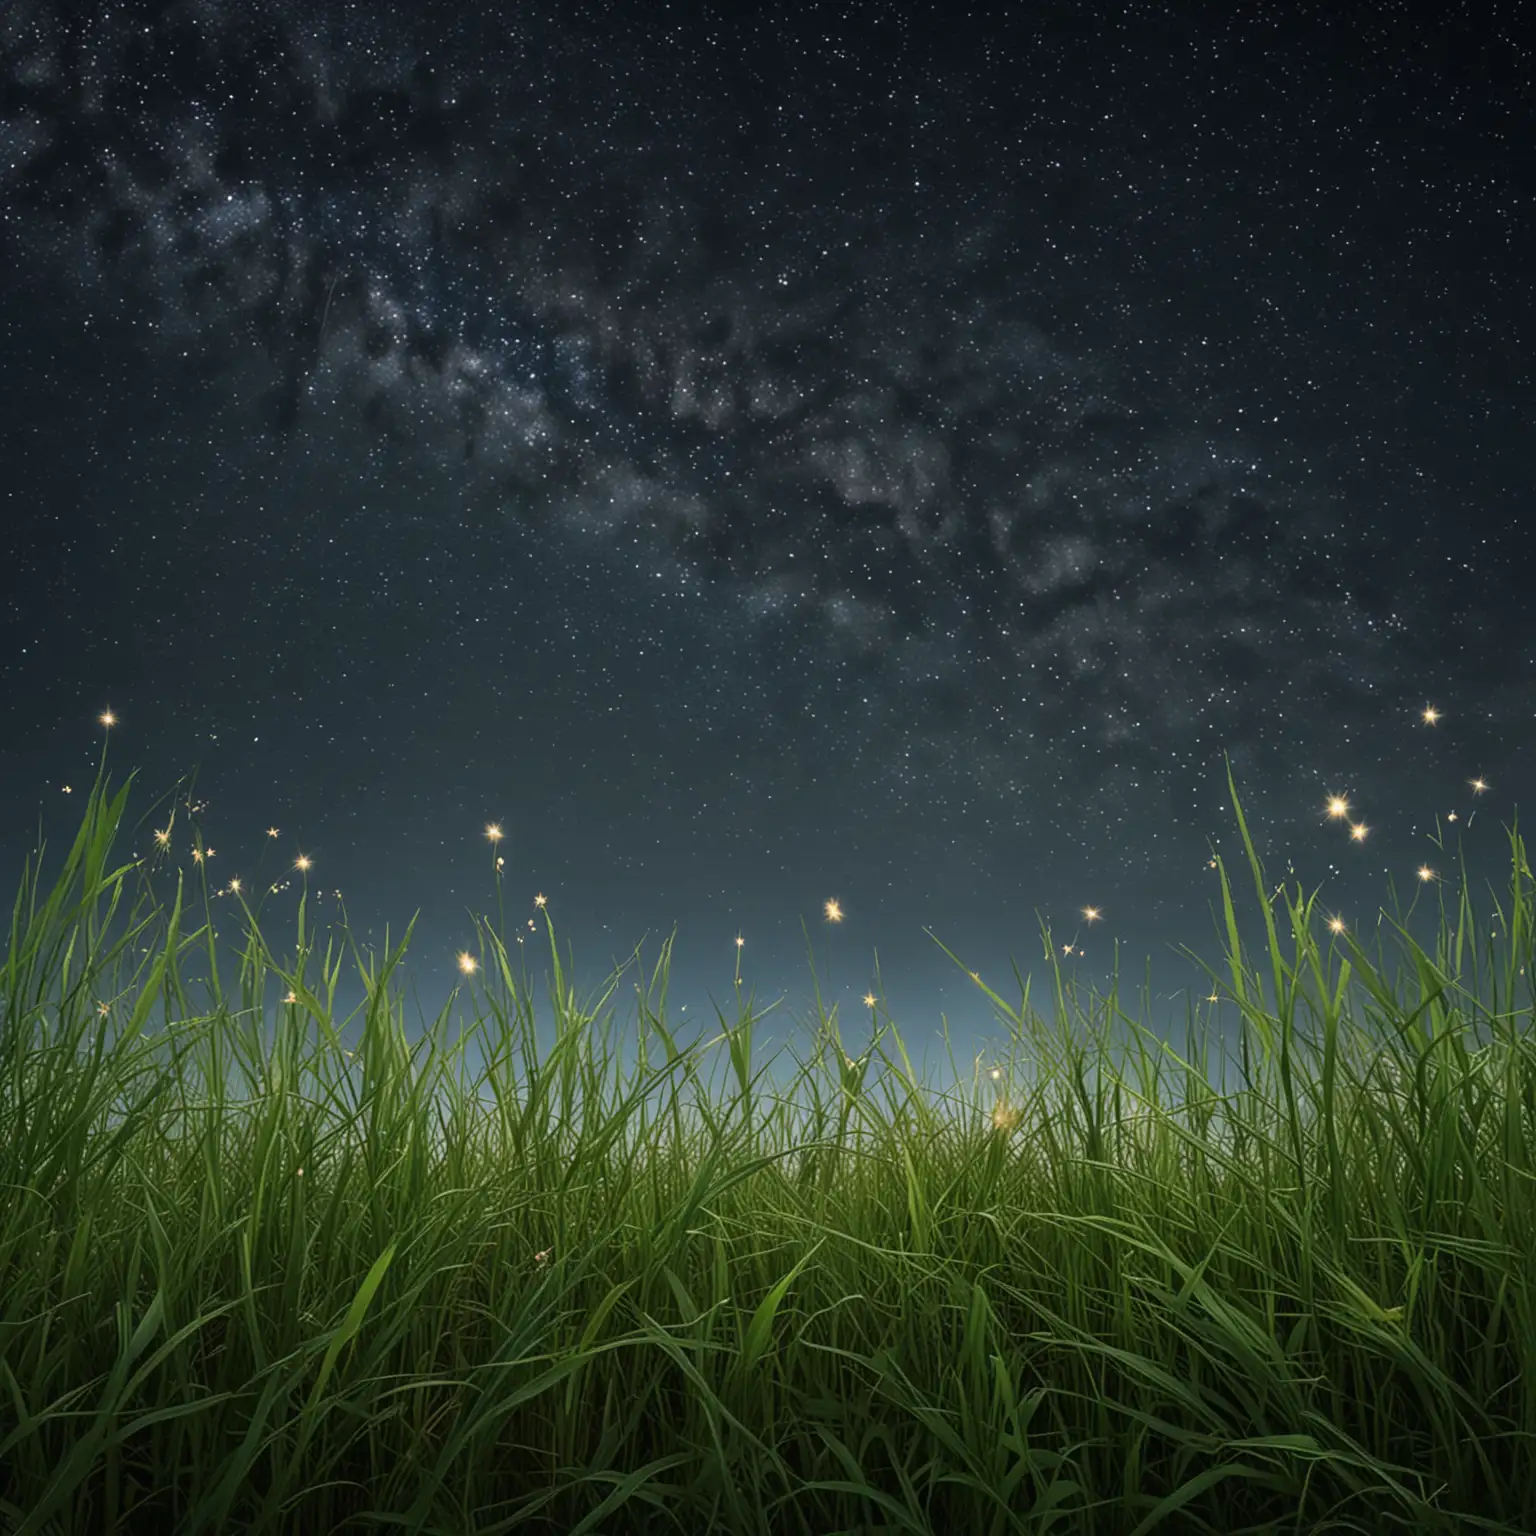 Serene Night Landscape with Grass and Starry Sky